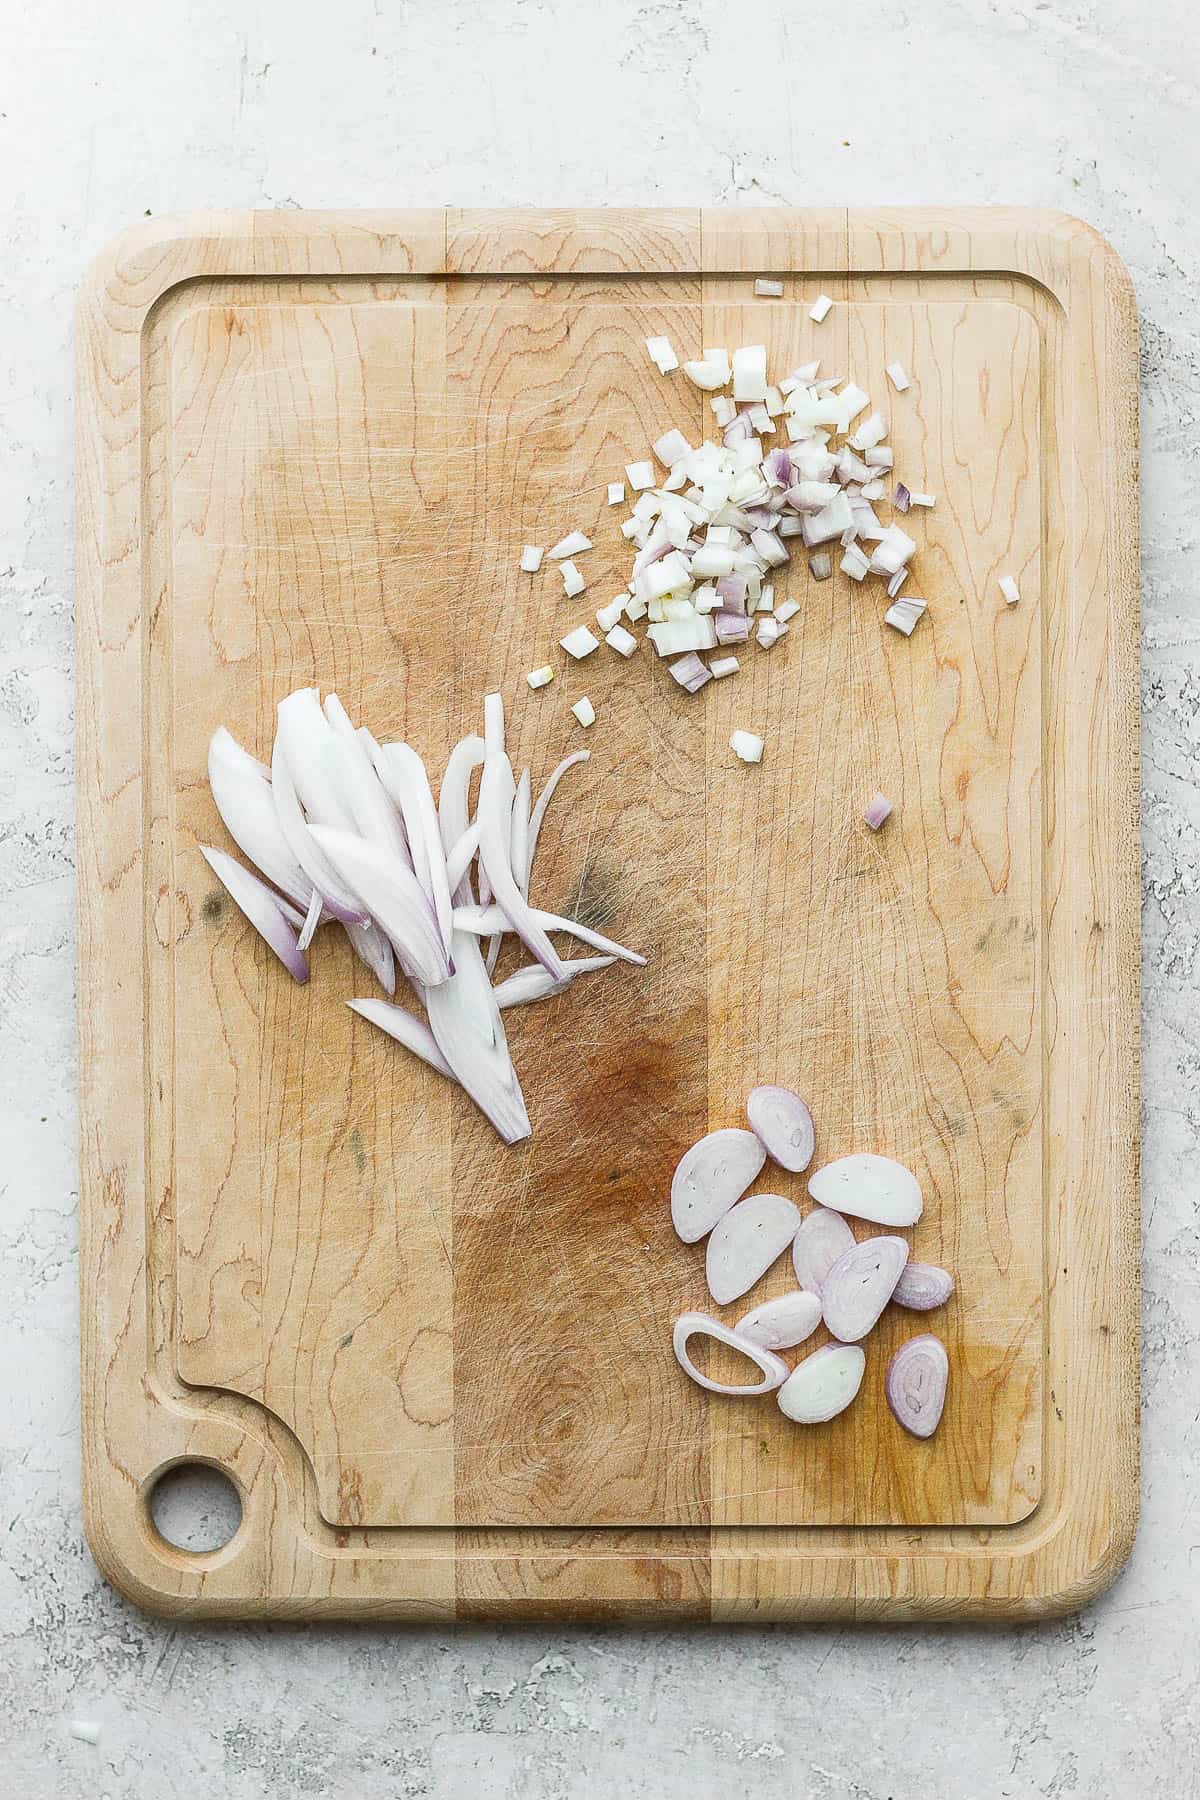 3 types of cuts for shallots on a cutting board